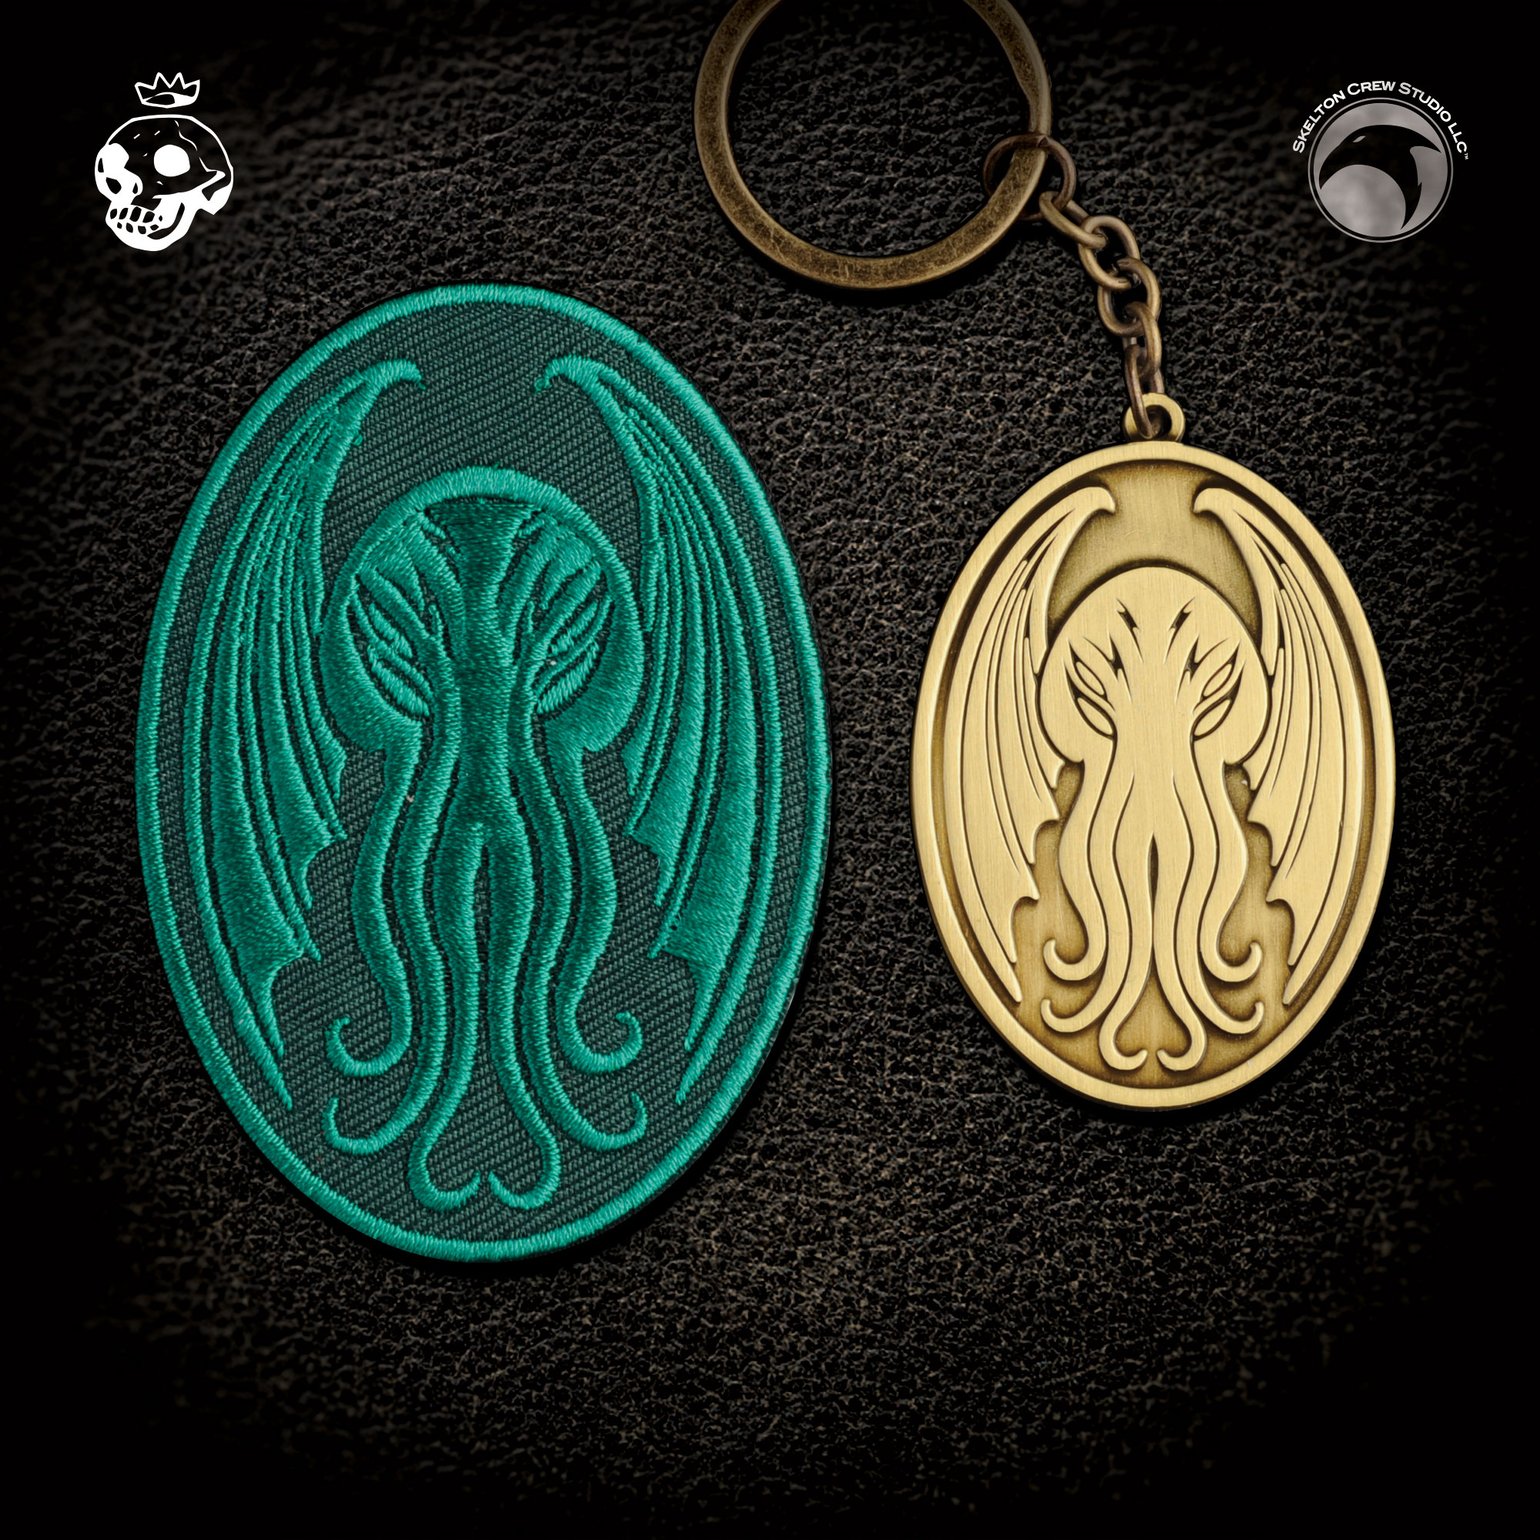 Image of The Skelton Crew Collection: Cthulhu patch & keychain set!